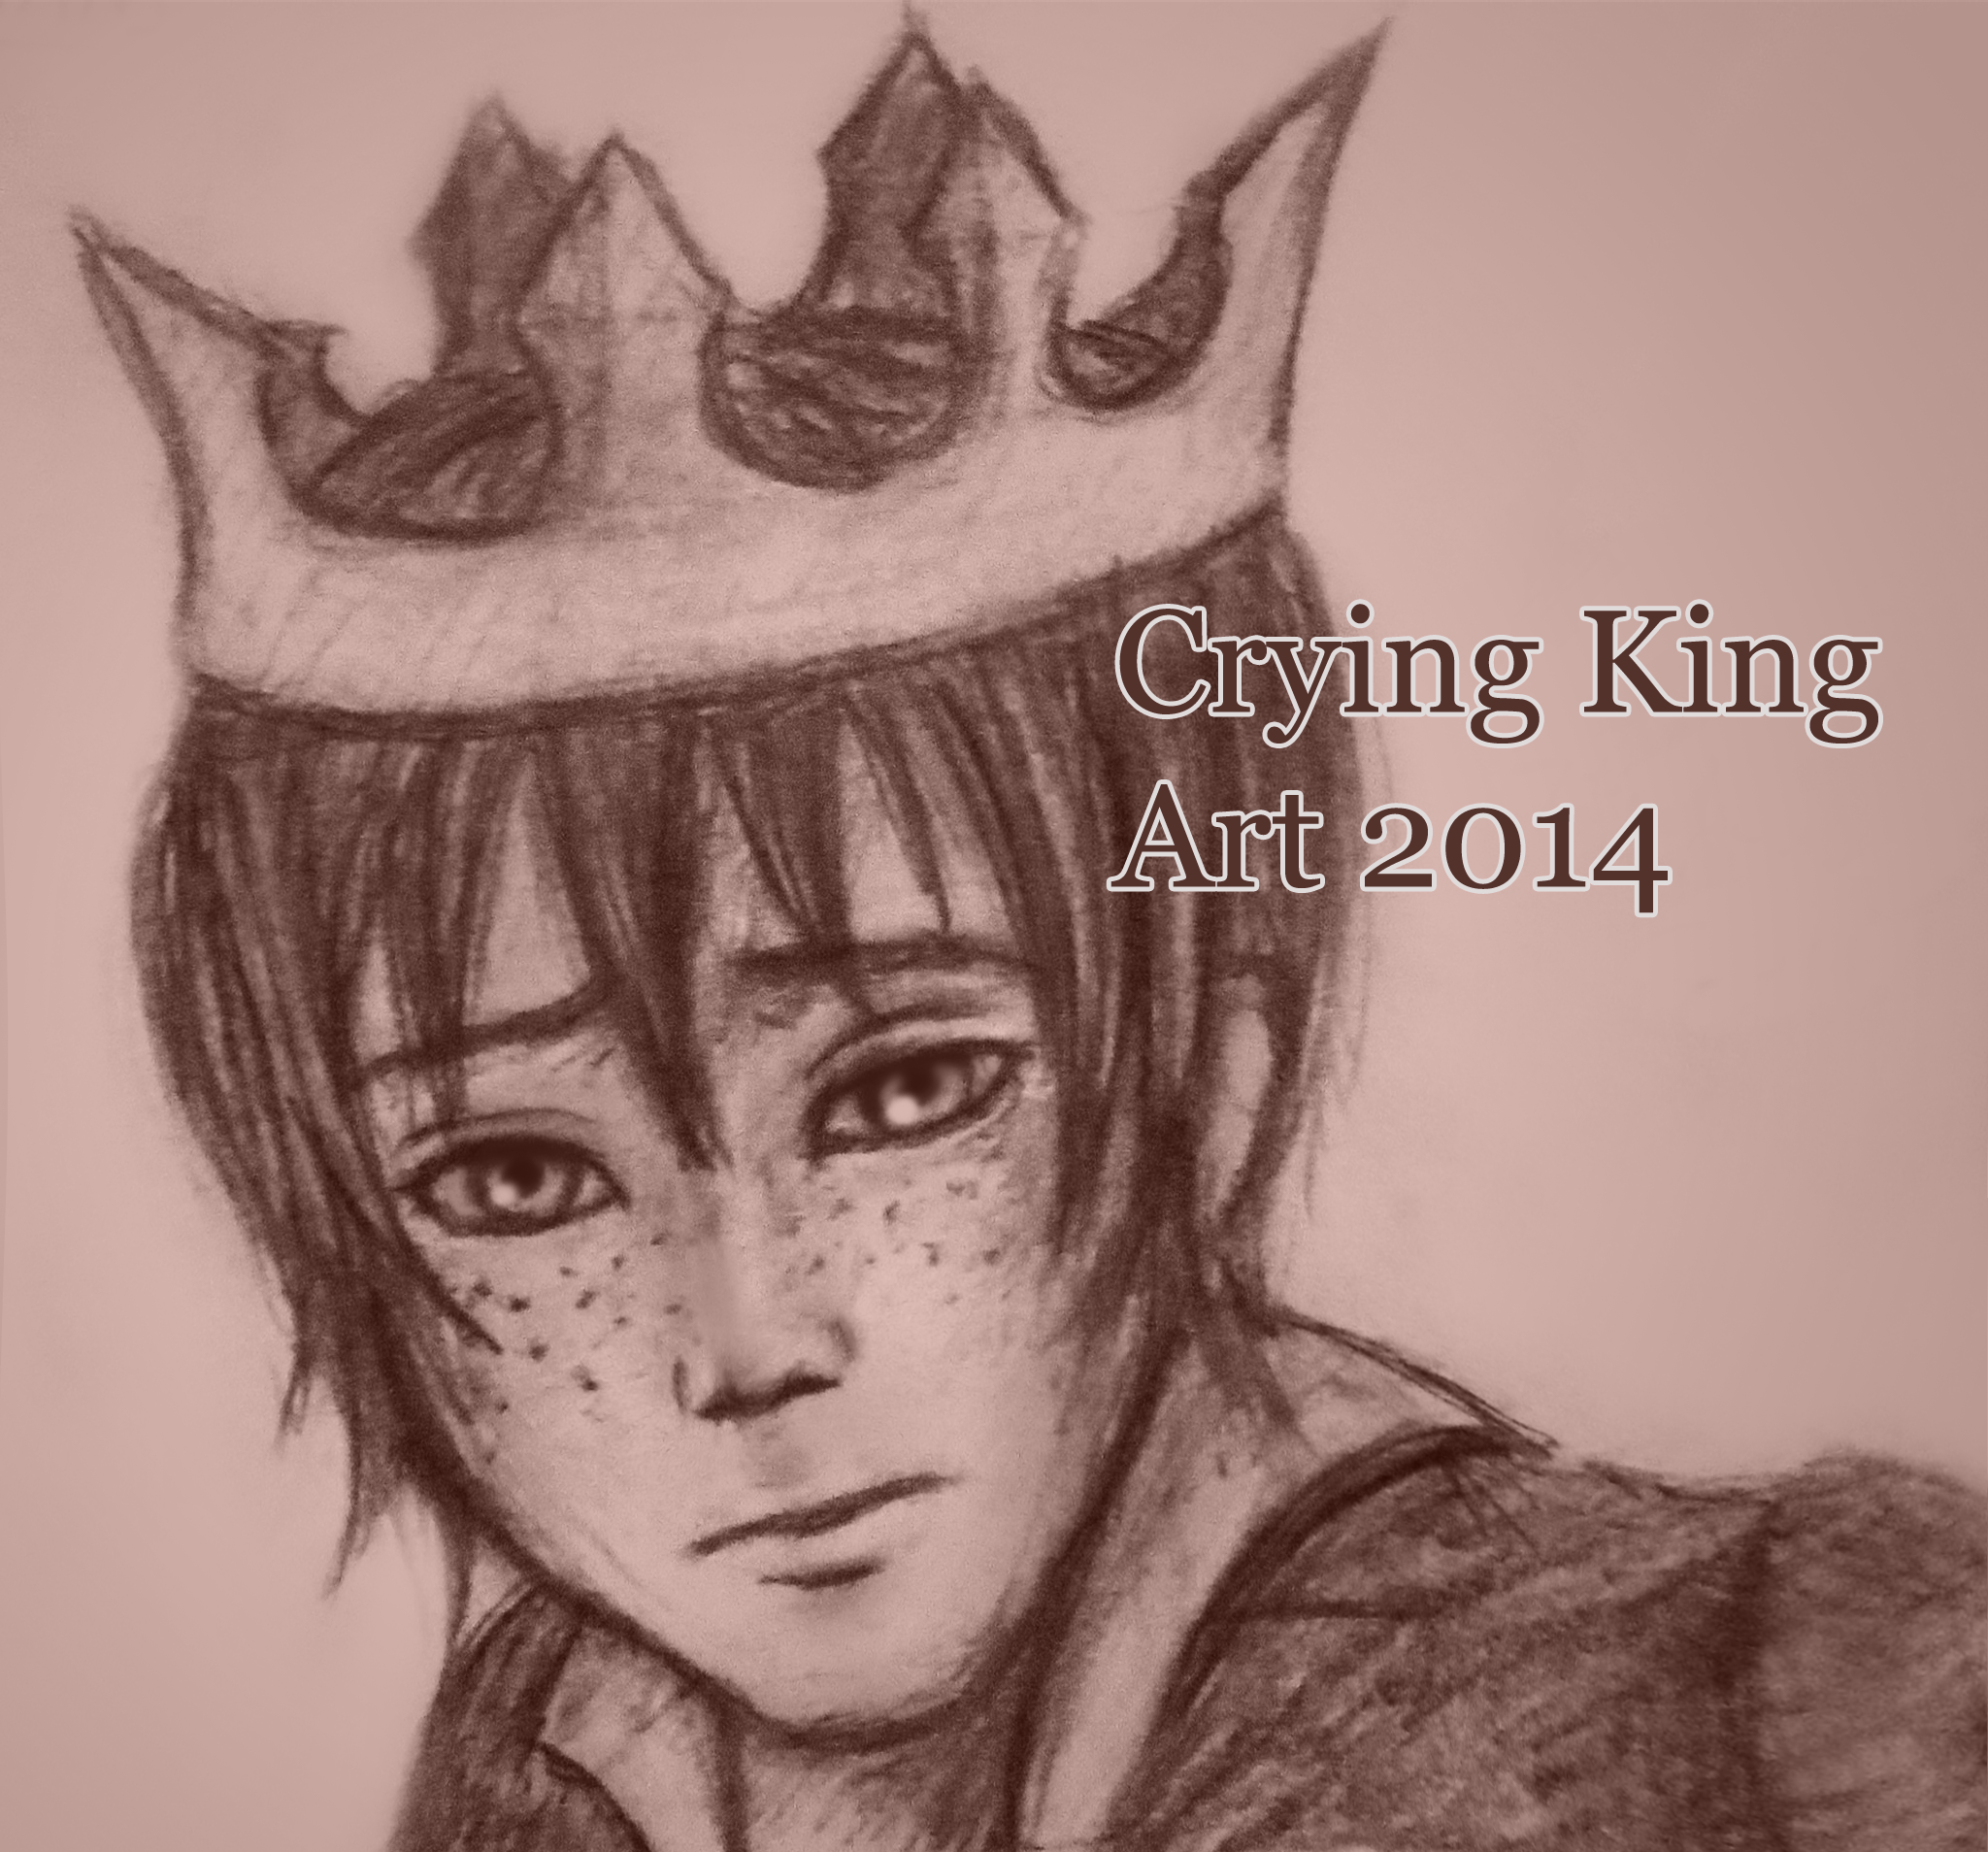 Crying King Art  All Kings Cry, Big or Small. The Art of Crying King